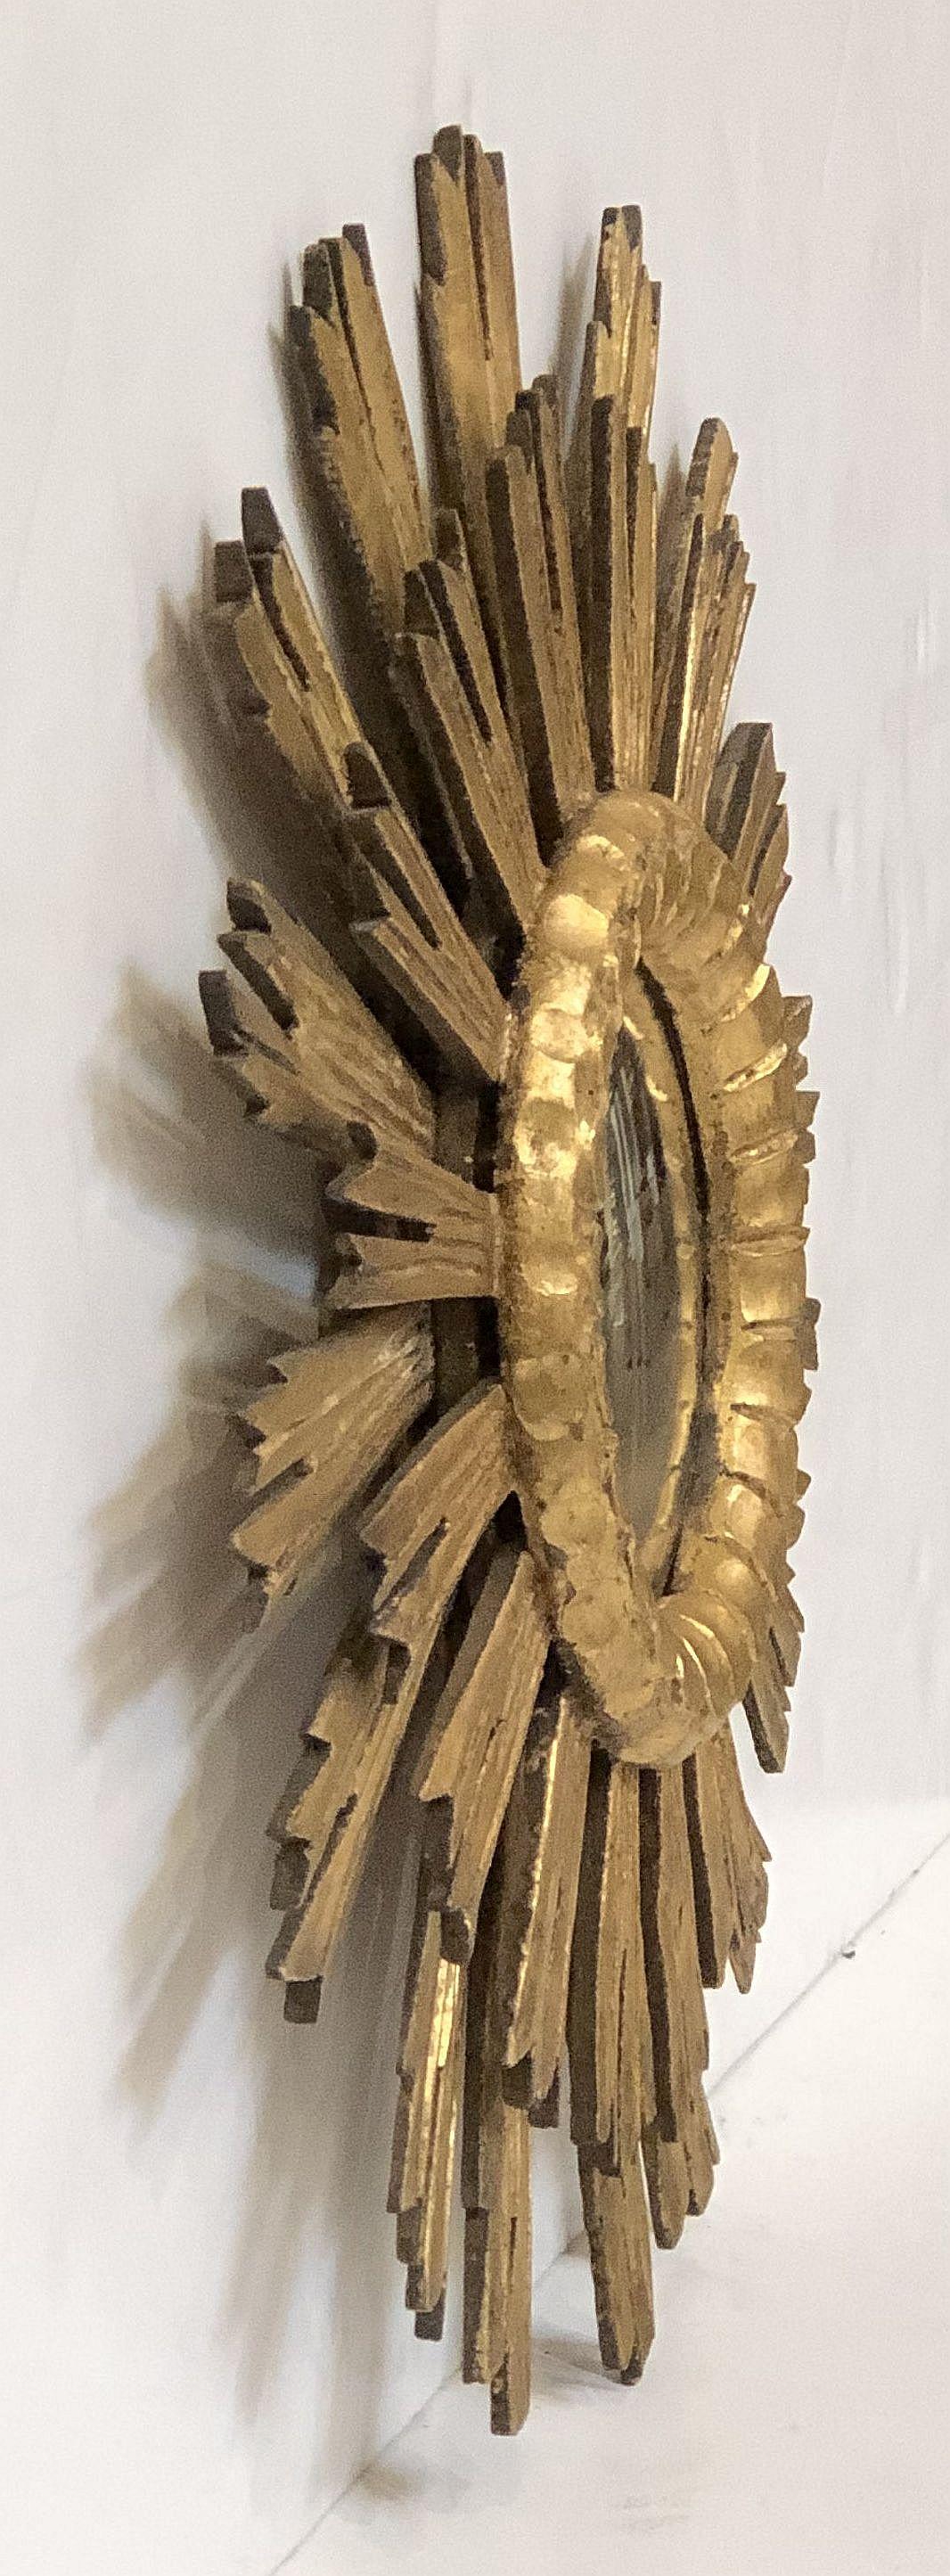 A lovely French gilt sunburst (or starburst) mirror, 21 inches diameter with round mirrored glass center in a moulded frame.